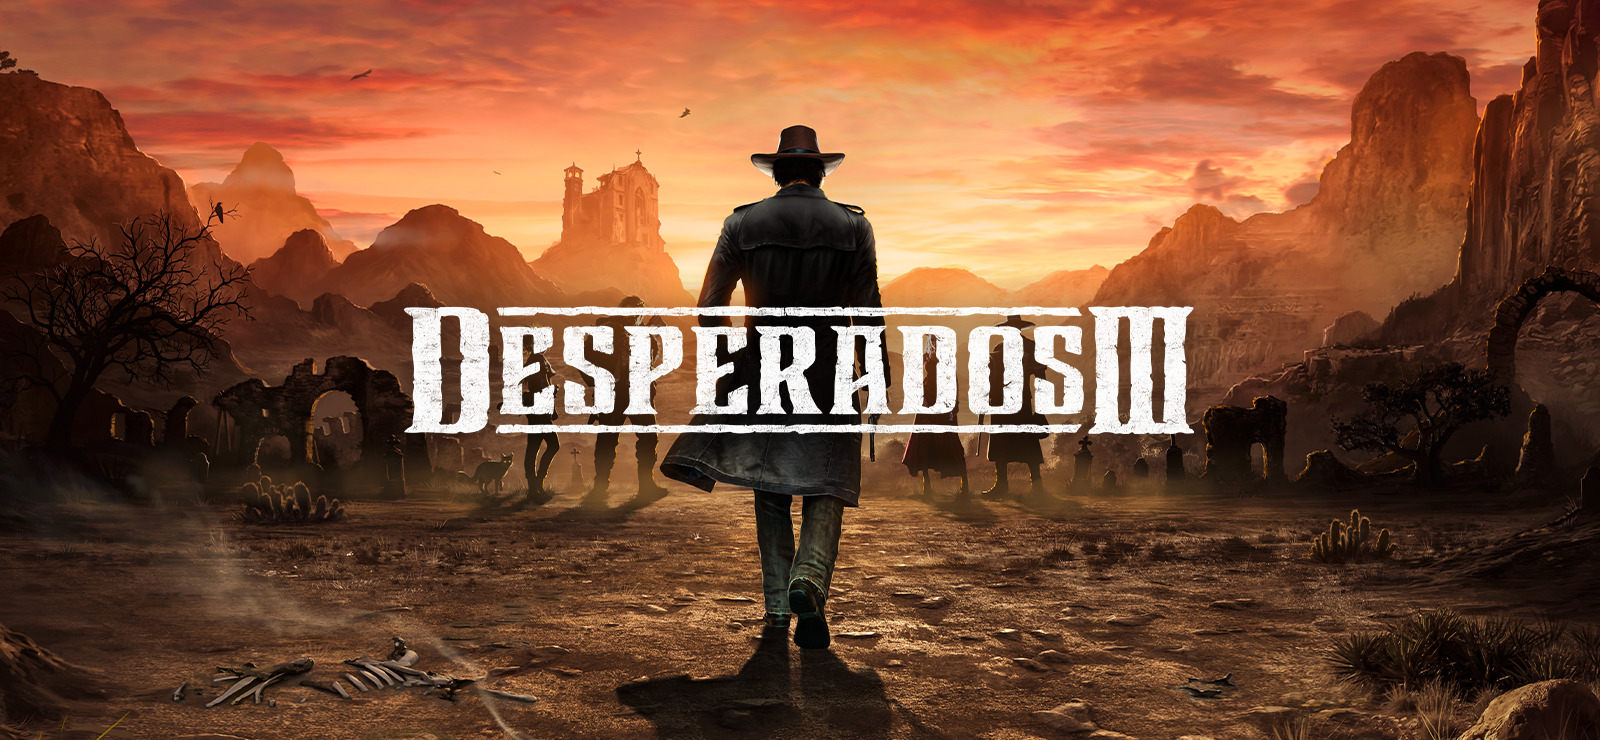 Desperados III Review - Worth more than a fistful of dollars